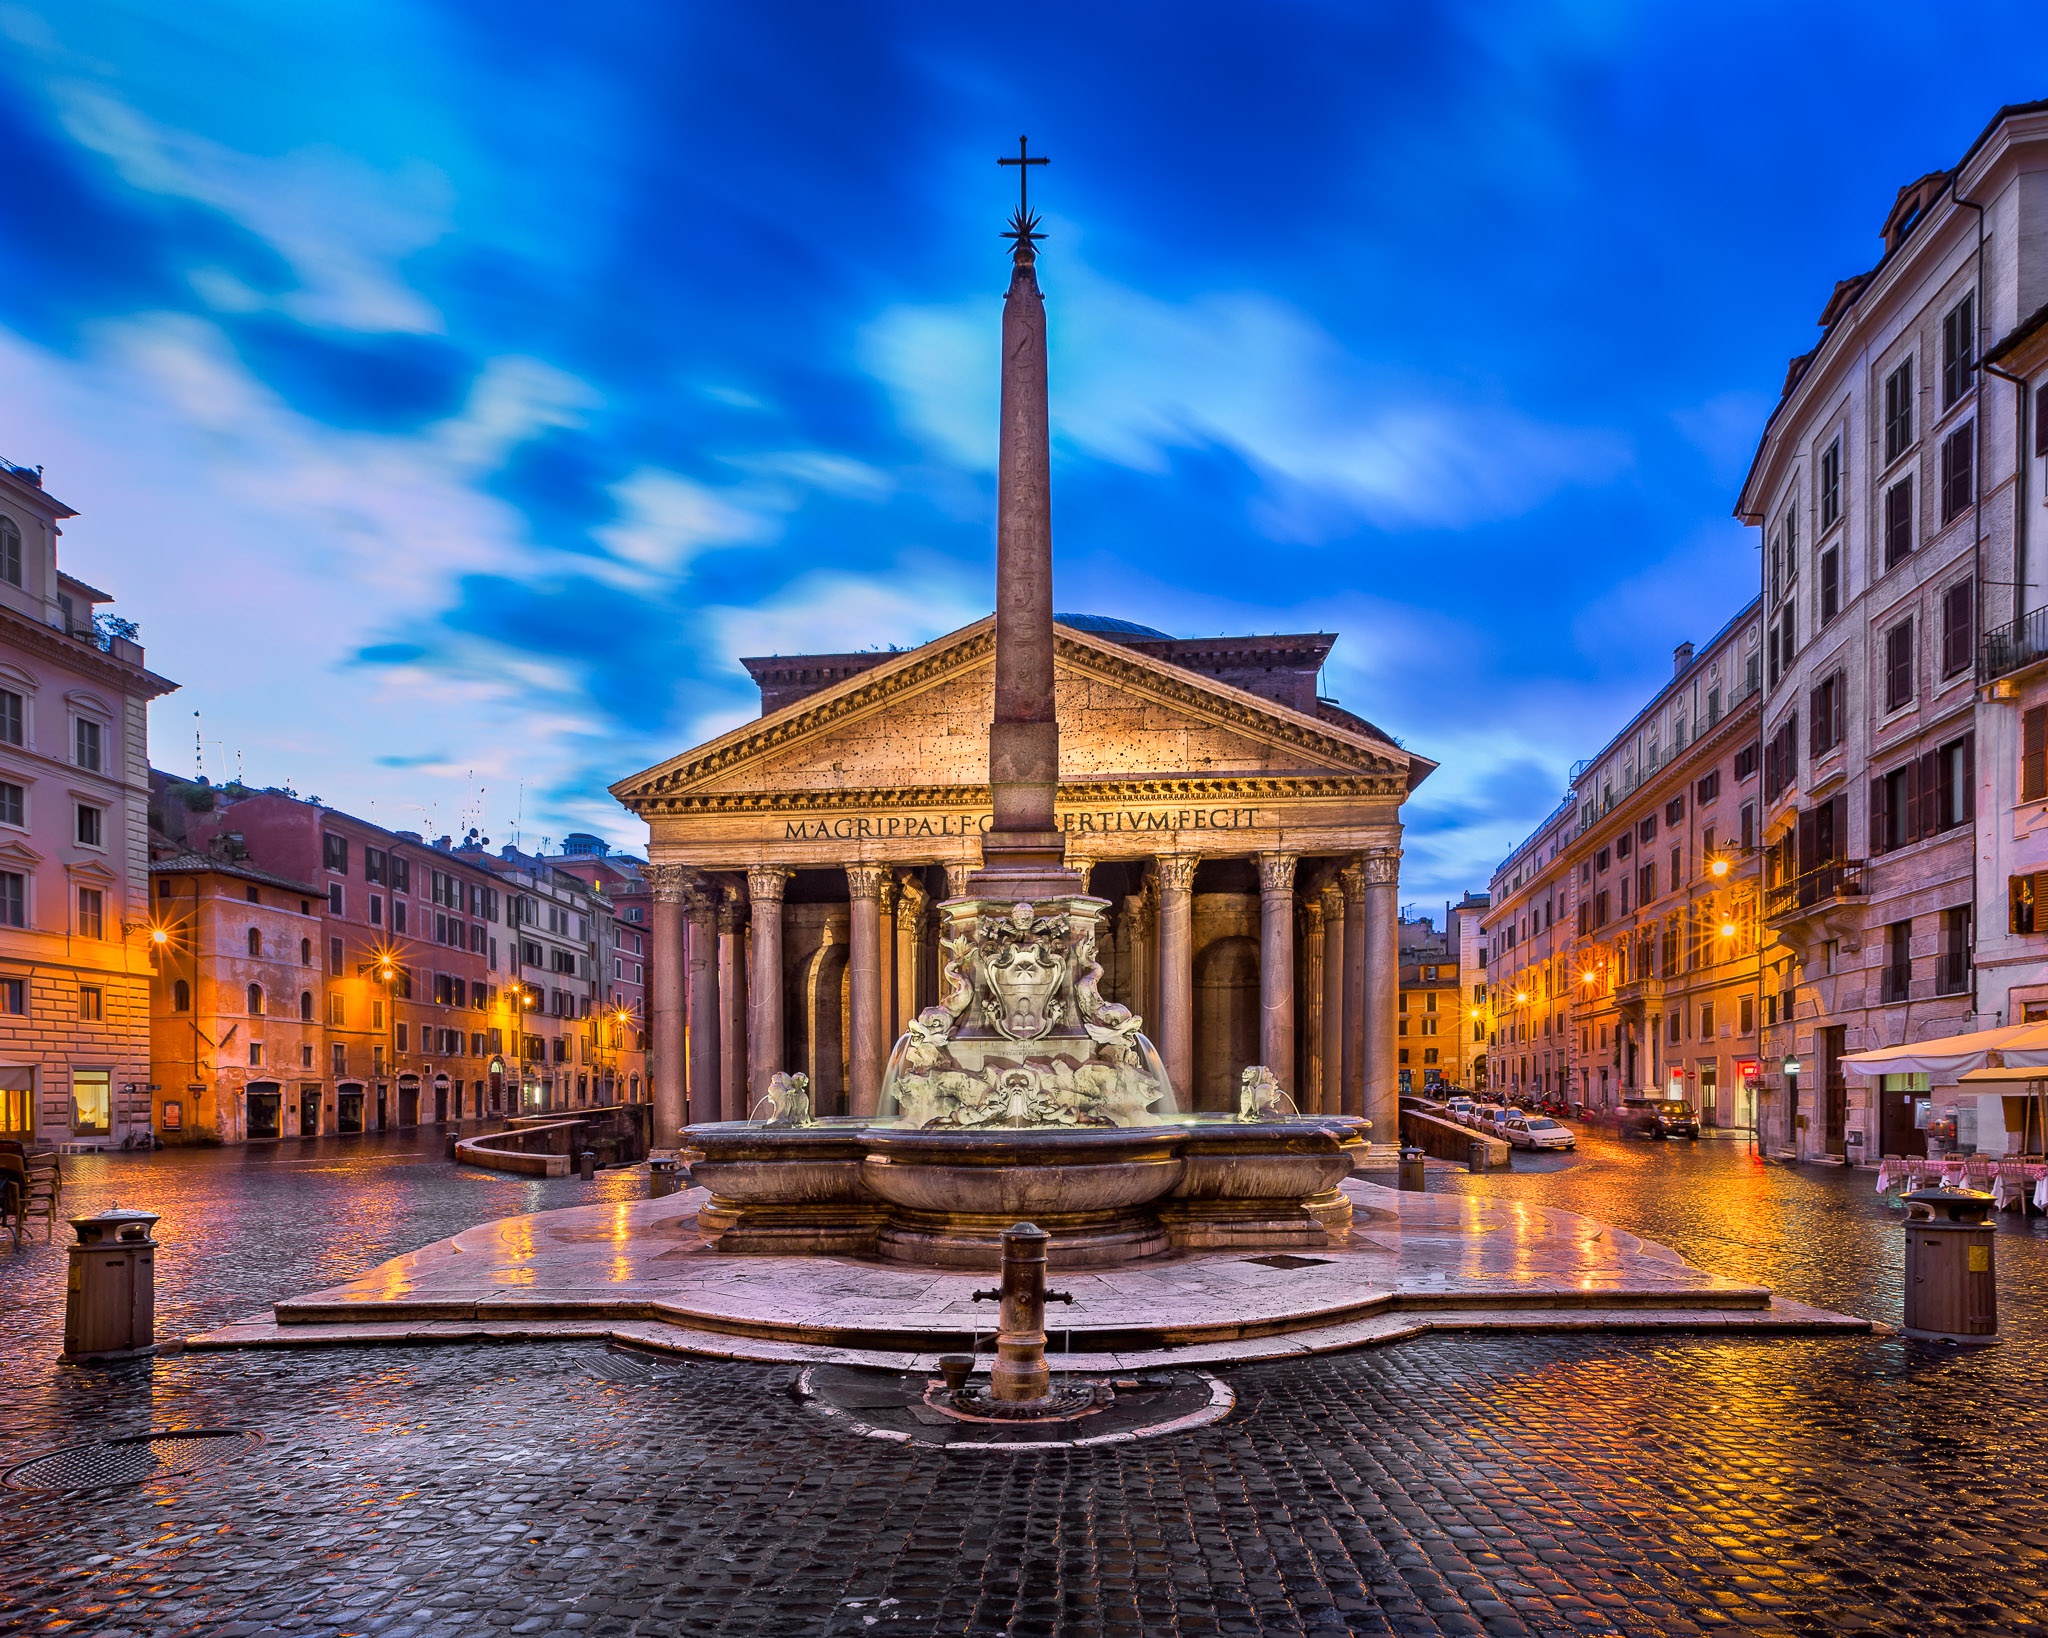 italy, rome, man made, building, city, fountain, obelisk, cities iphone wallpaper